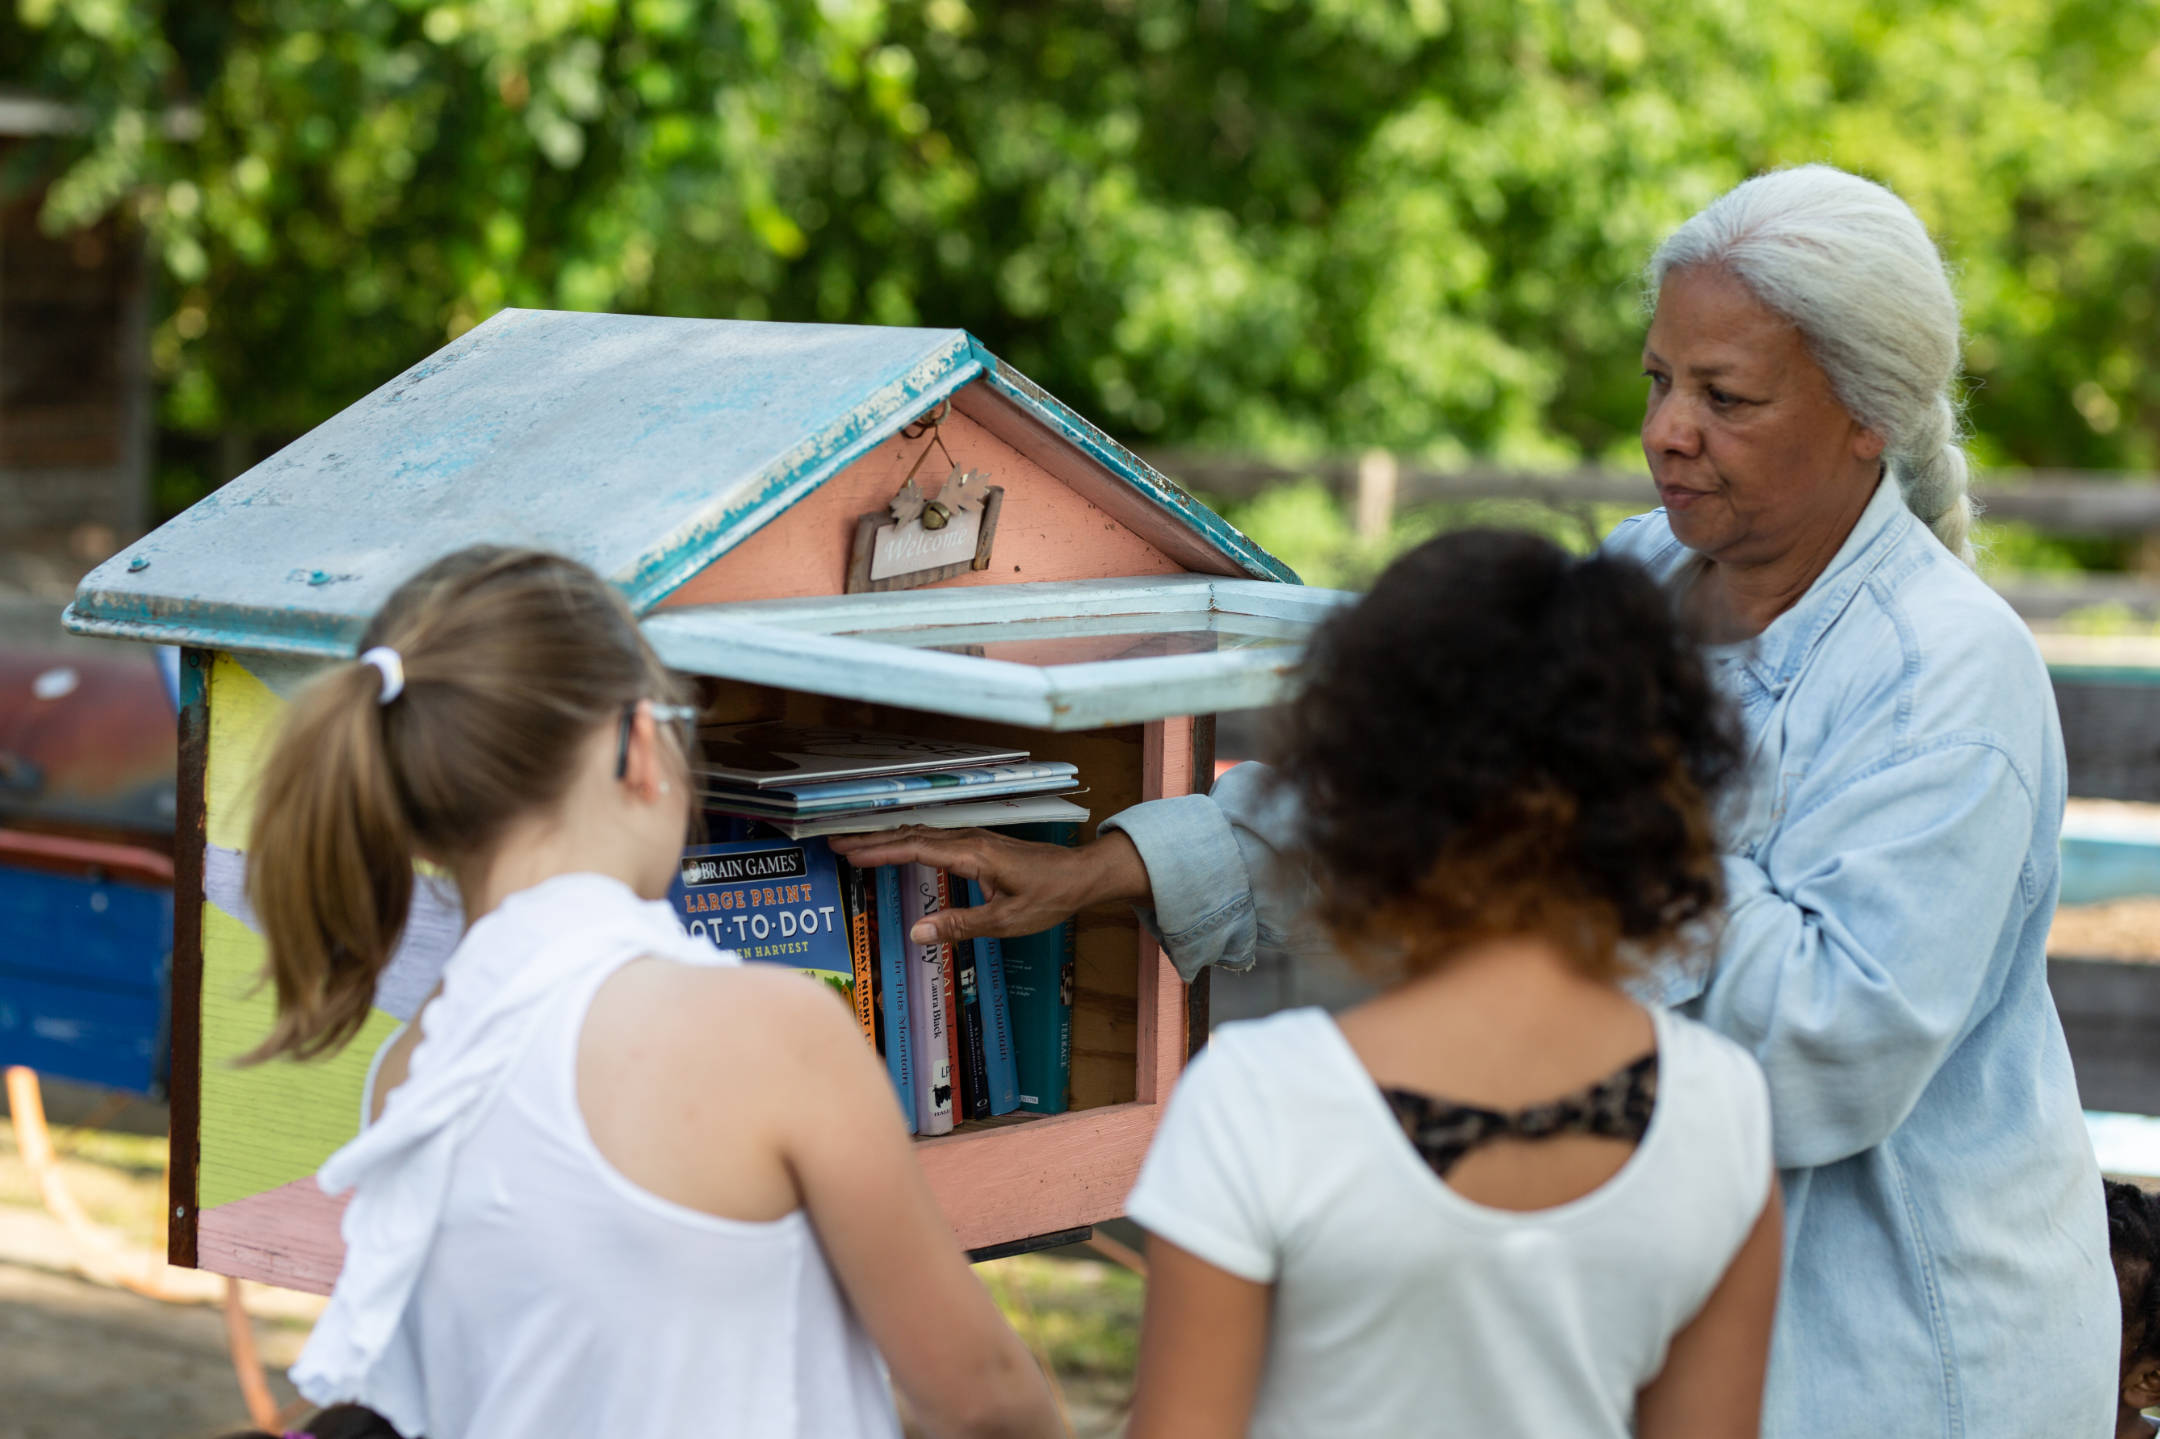 Residents refill a Free Little Library at the community garden in the Monticello neighborhood of Clarksburg